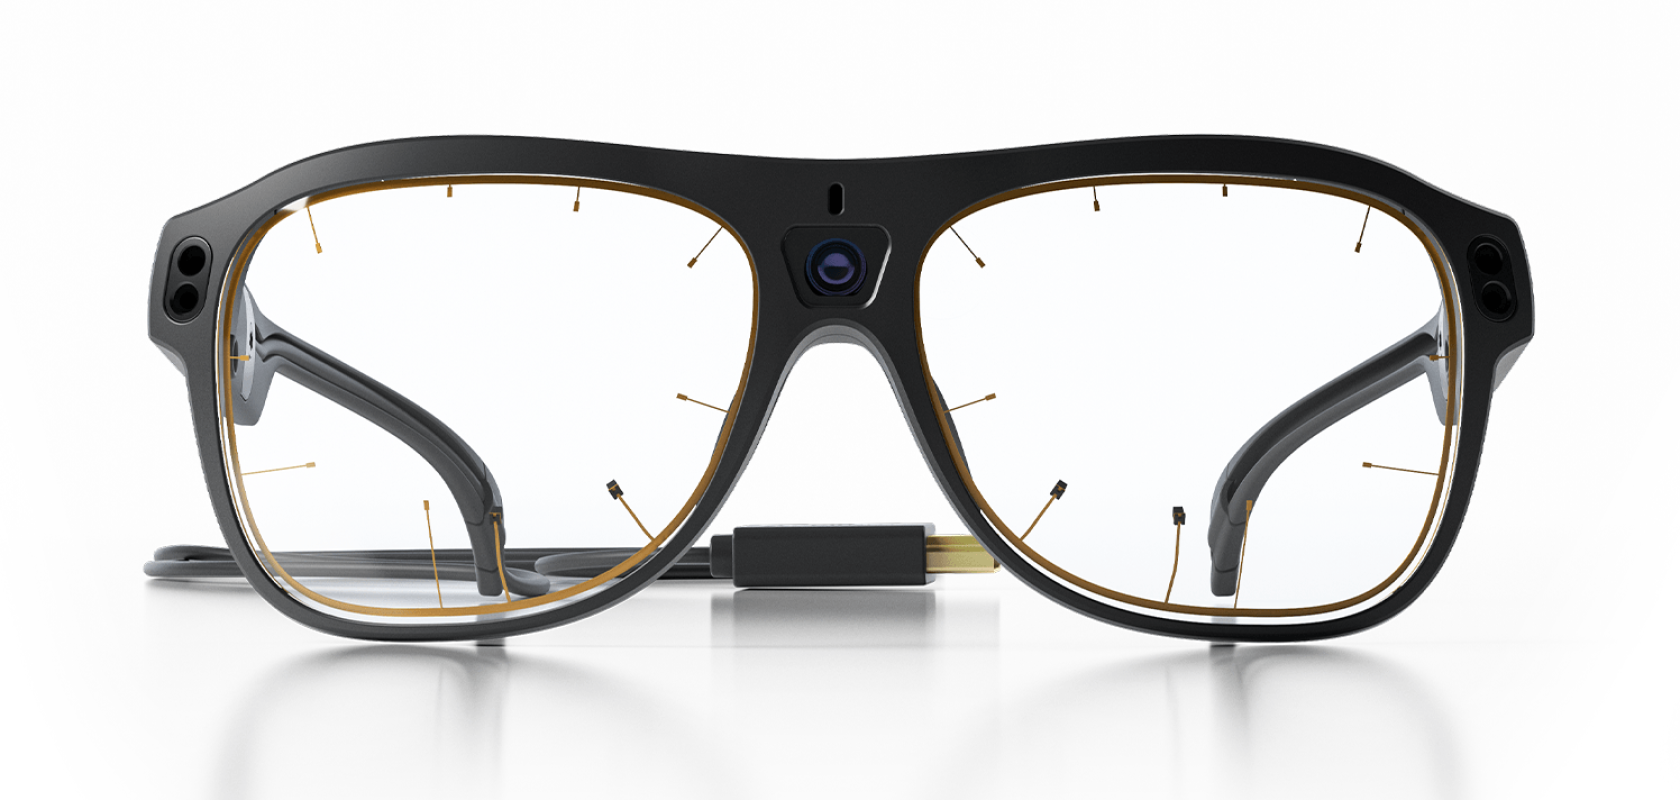 In its Pro Glasses 3, Tobii integrates the illuminators used for eye tracking into the lenses of the device  Image: Tobii AB